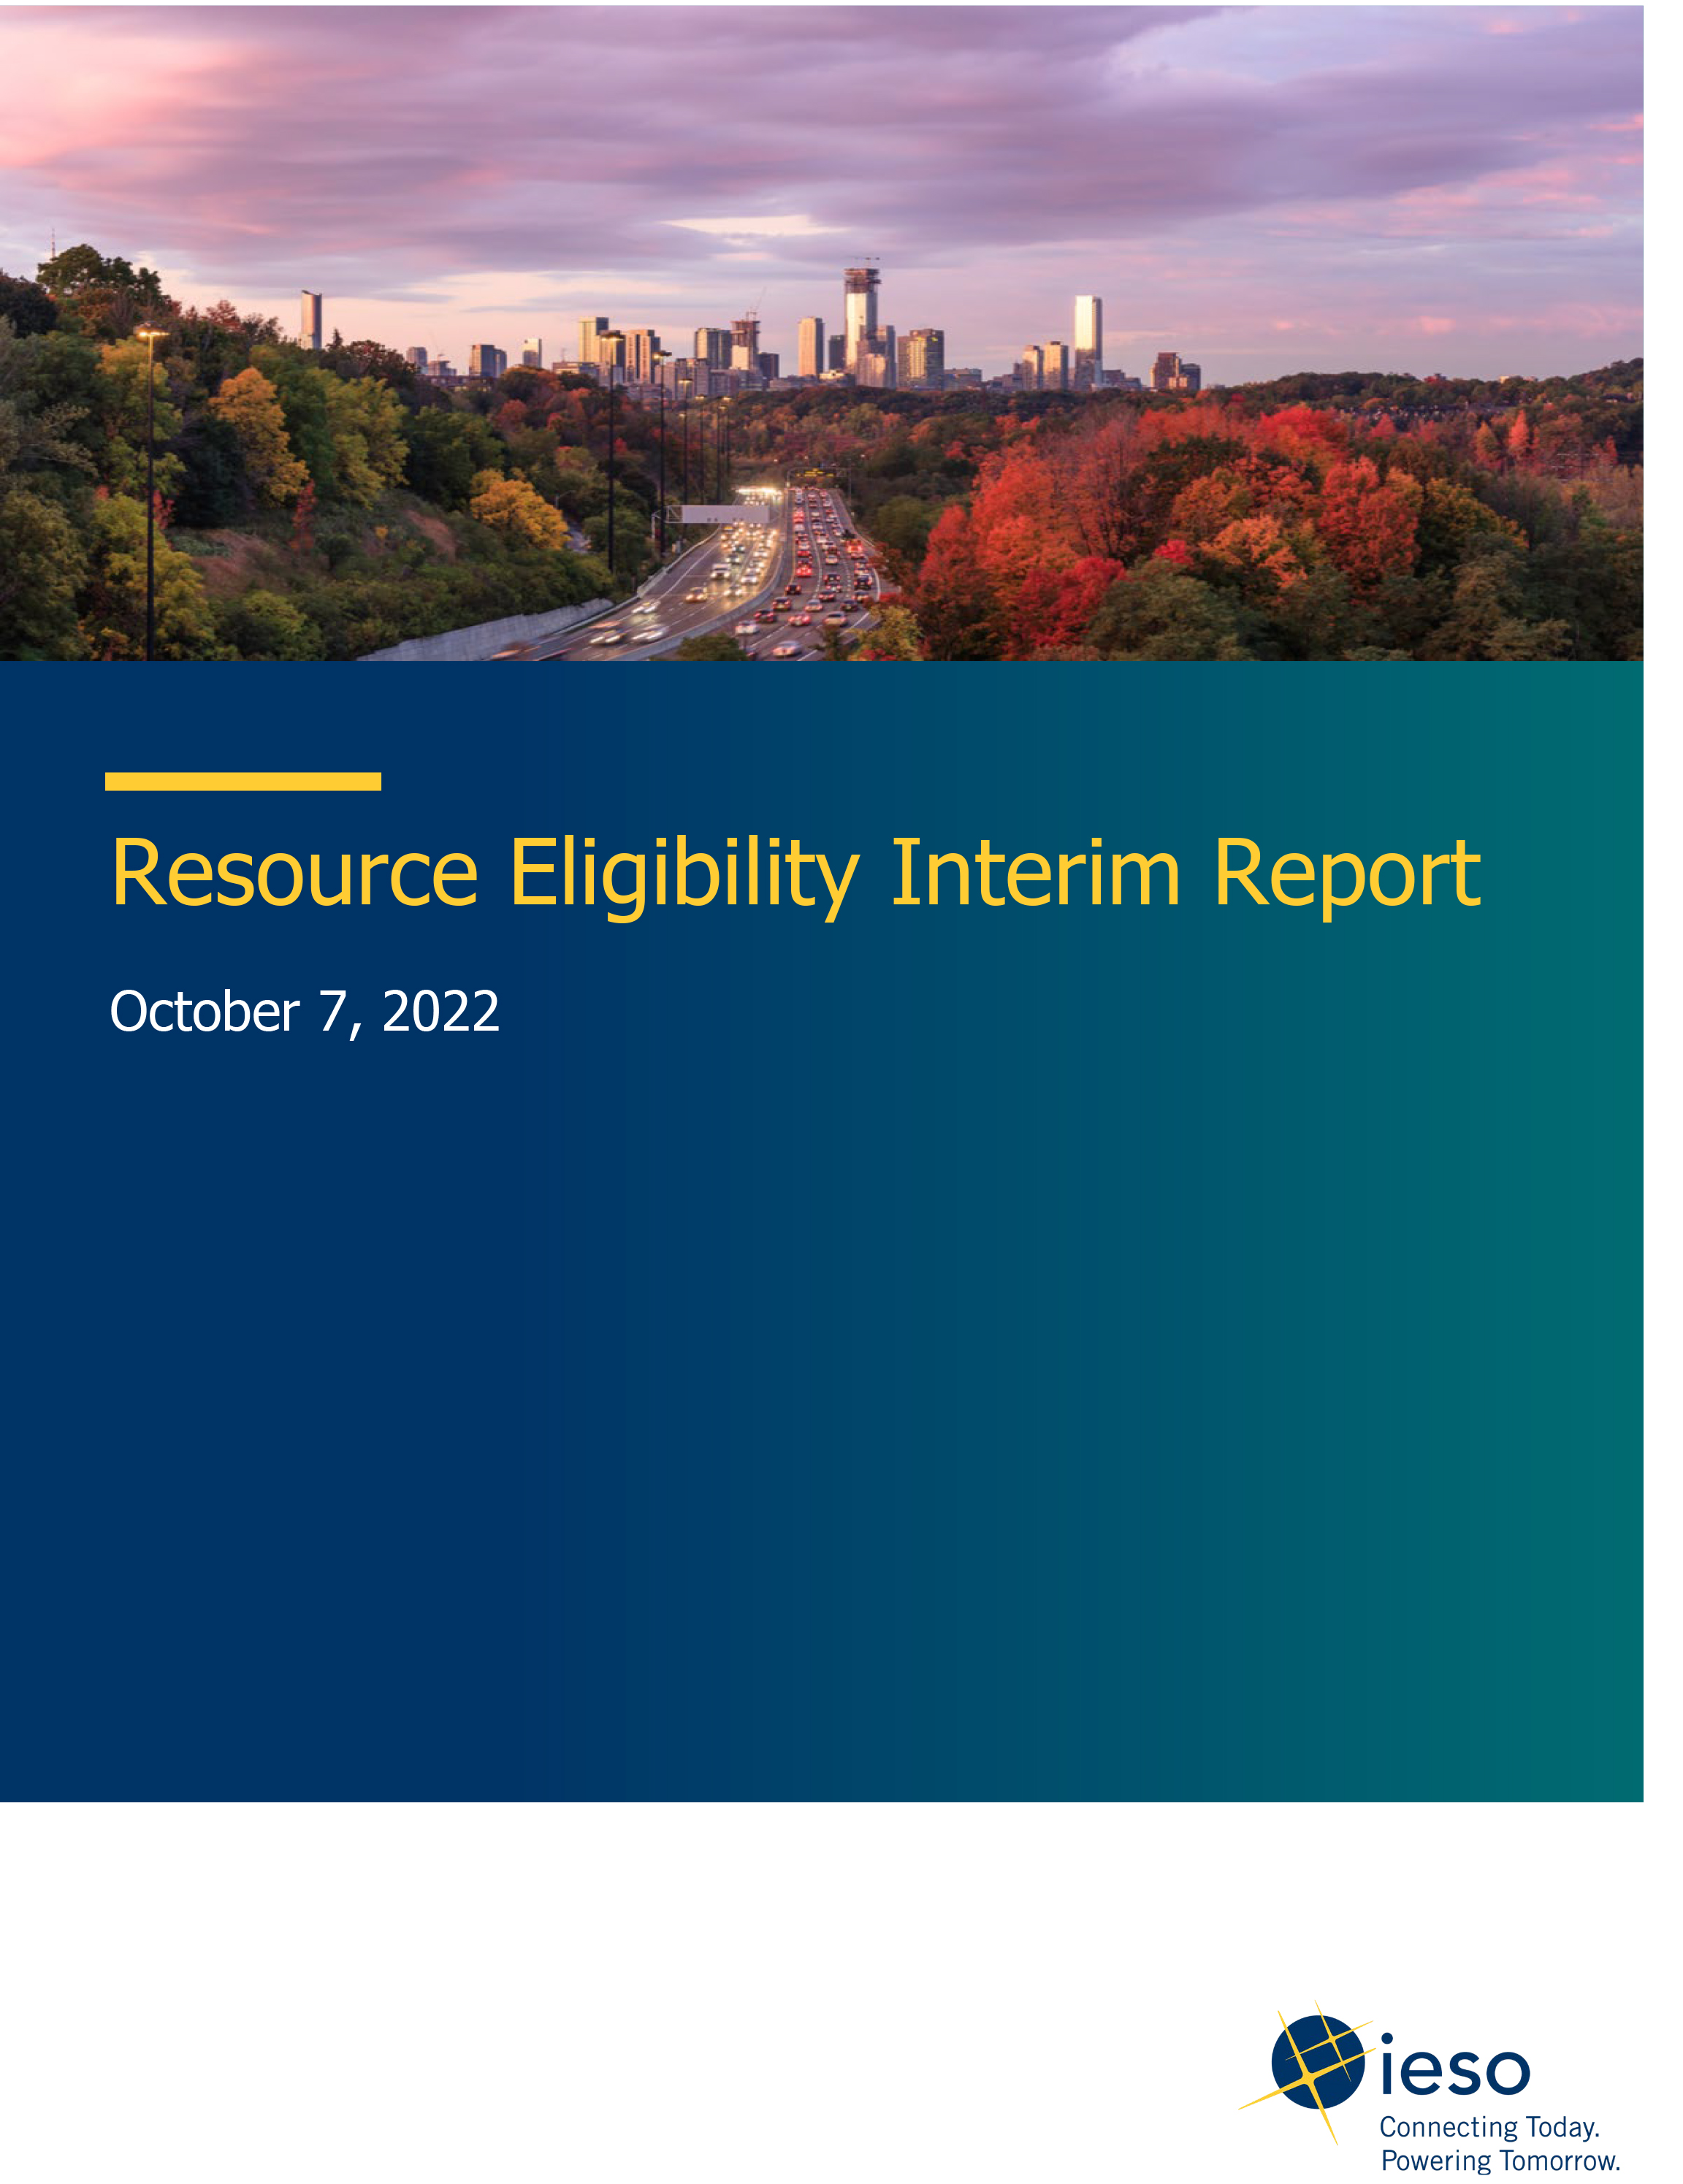 Resource Eligibility Interim Report cover page